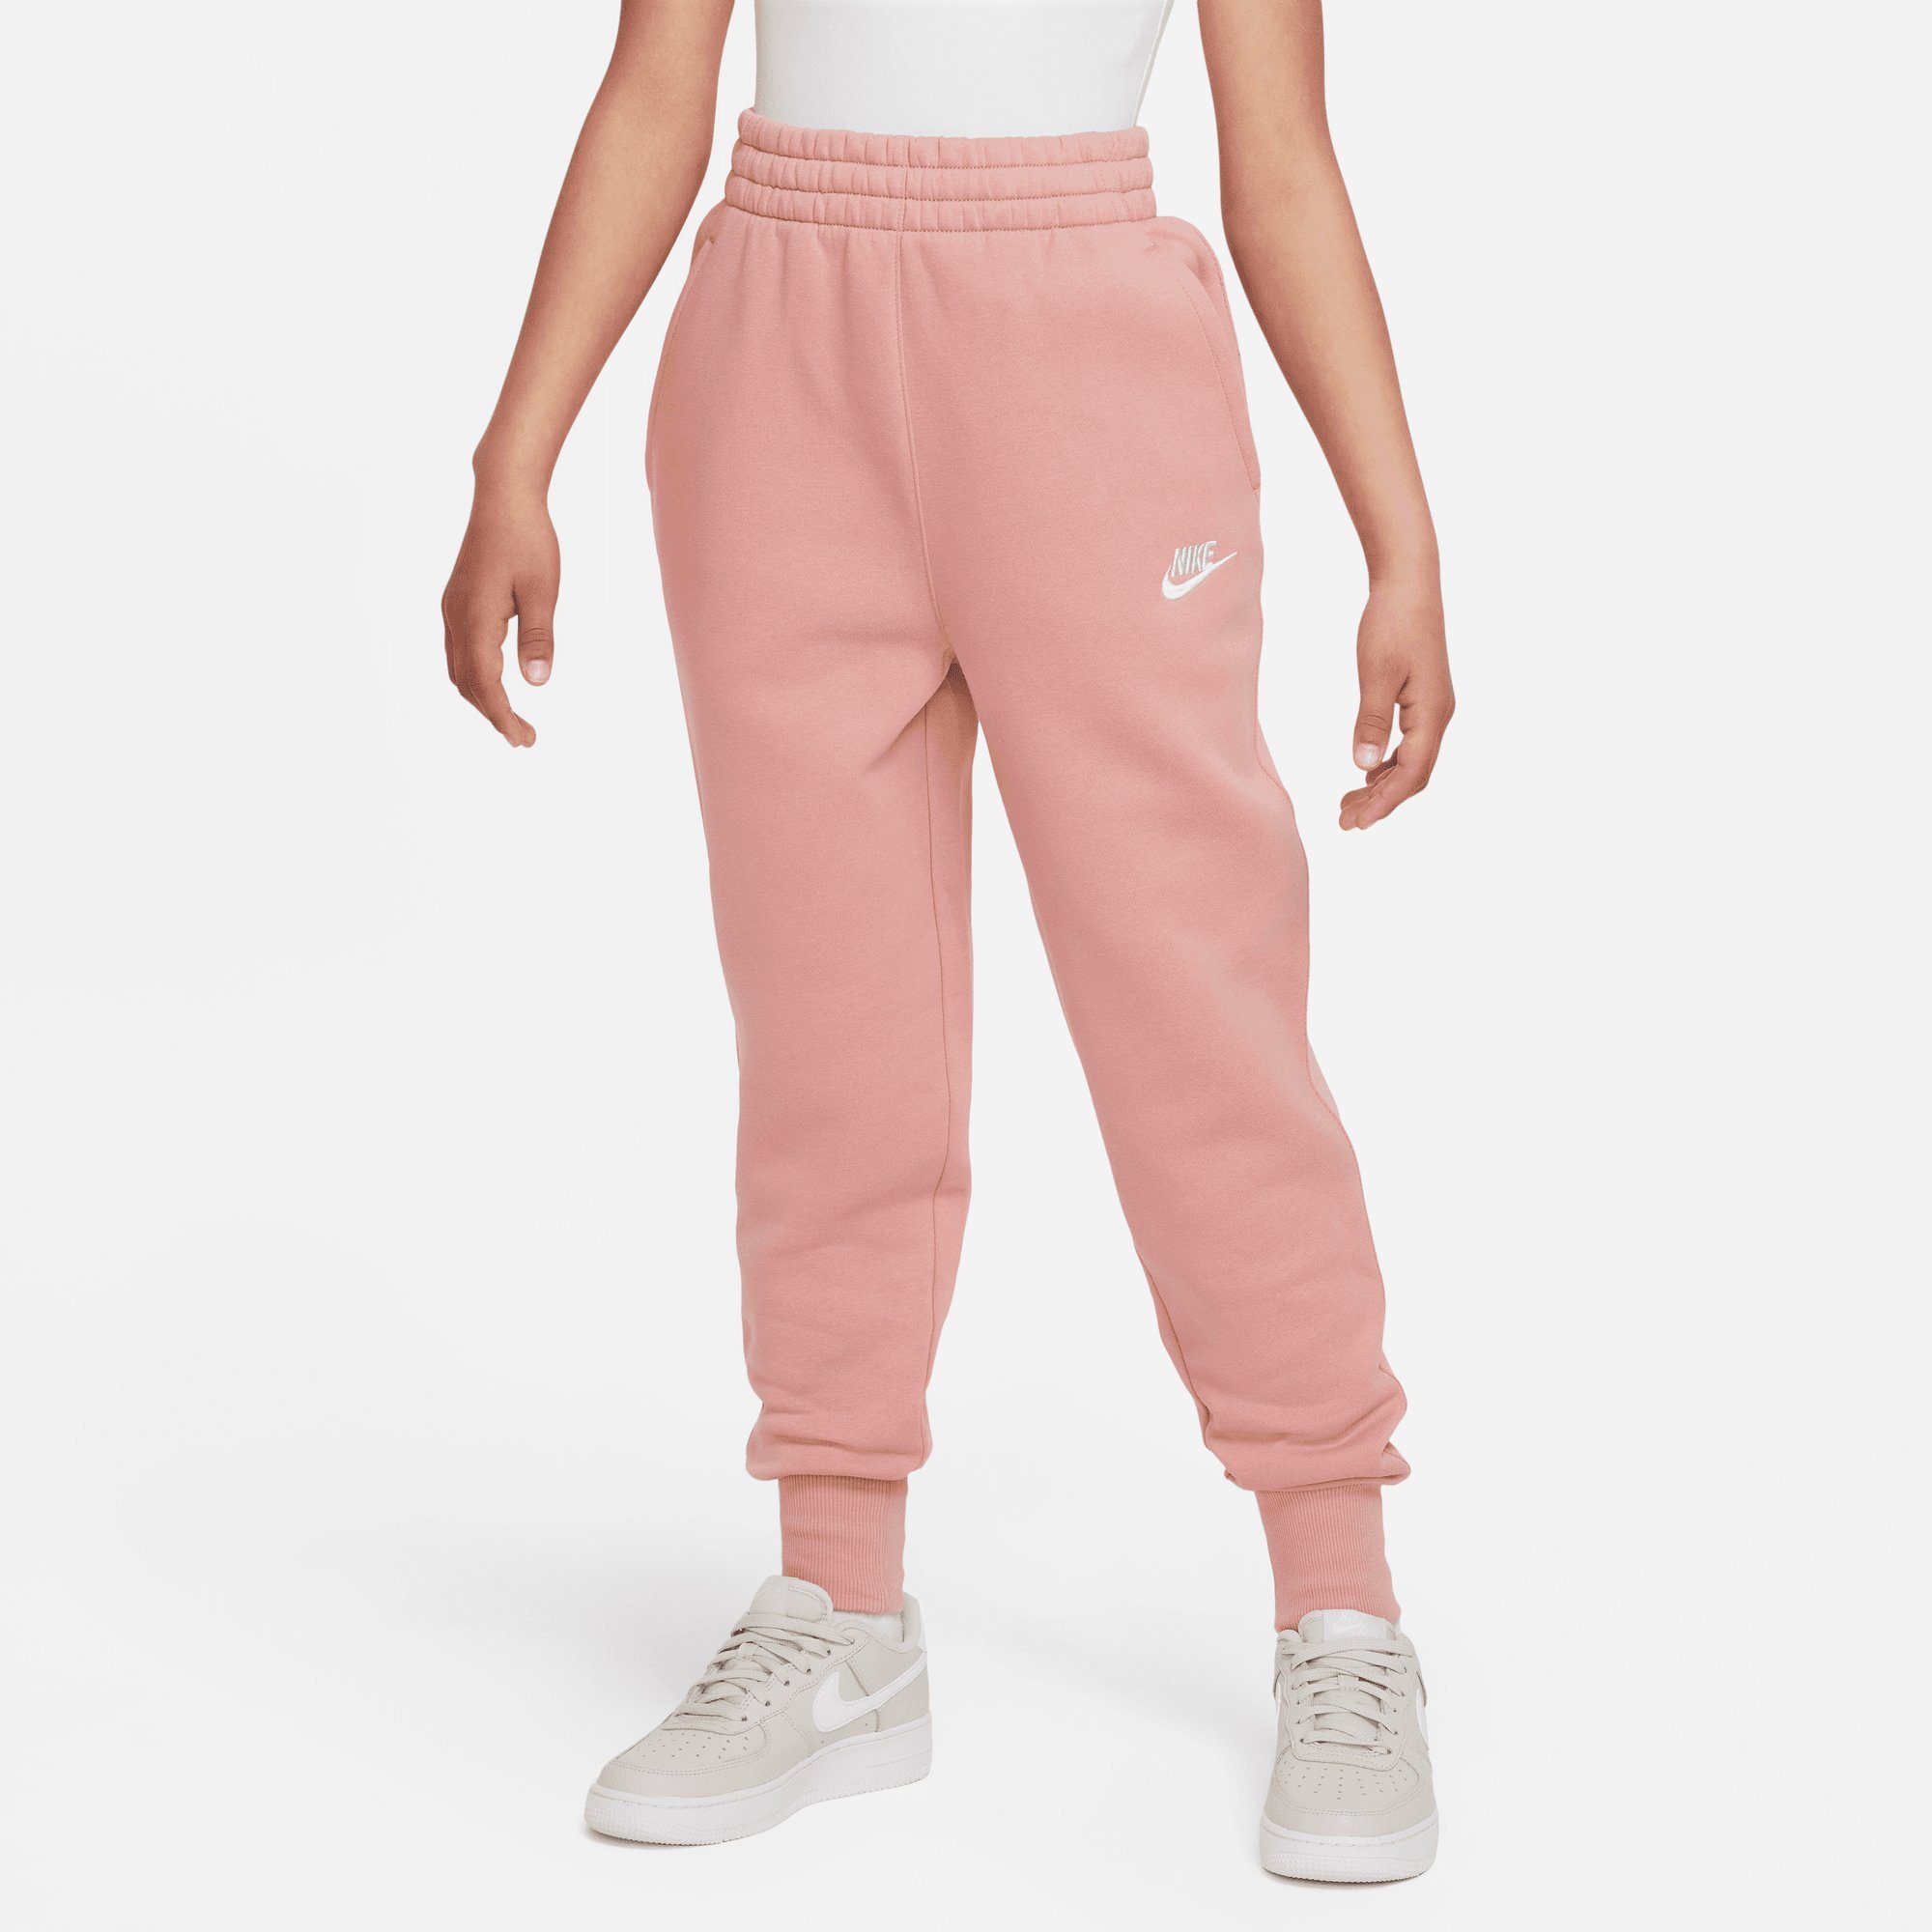 RED PANTS (GIRLS) HIGH-WAISTED Nike BIG STARDUST/RED Jogginghose STARDUST/WHITE FLEECE KIDS' FITTED CLUB Sportswear